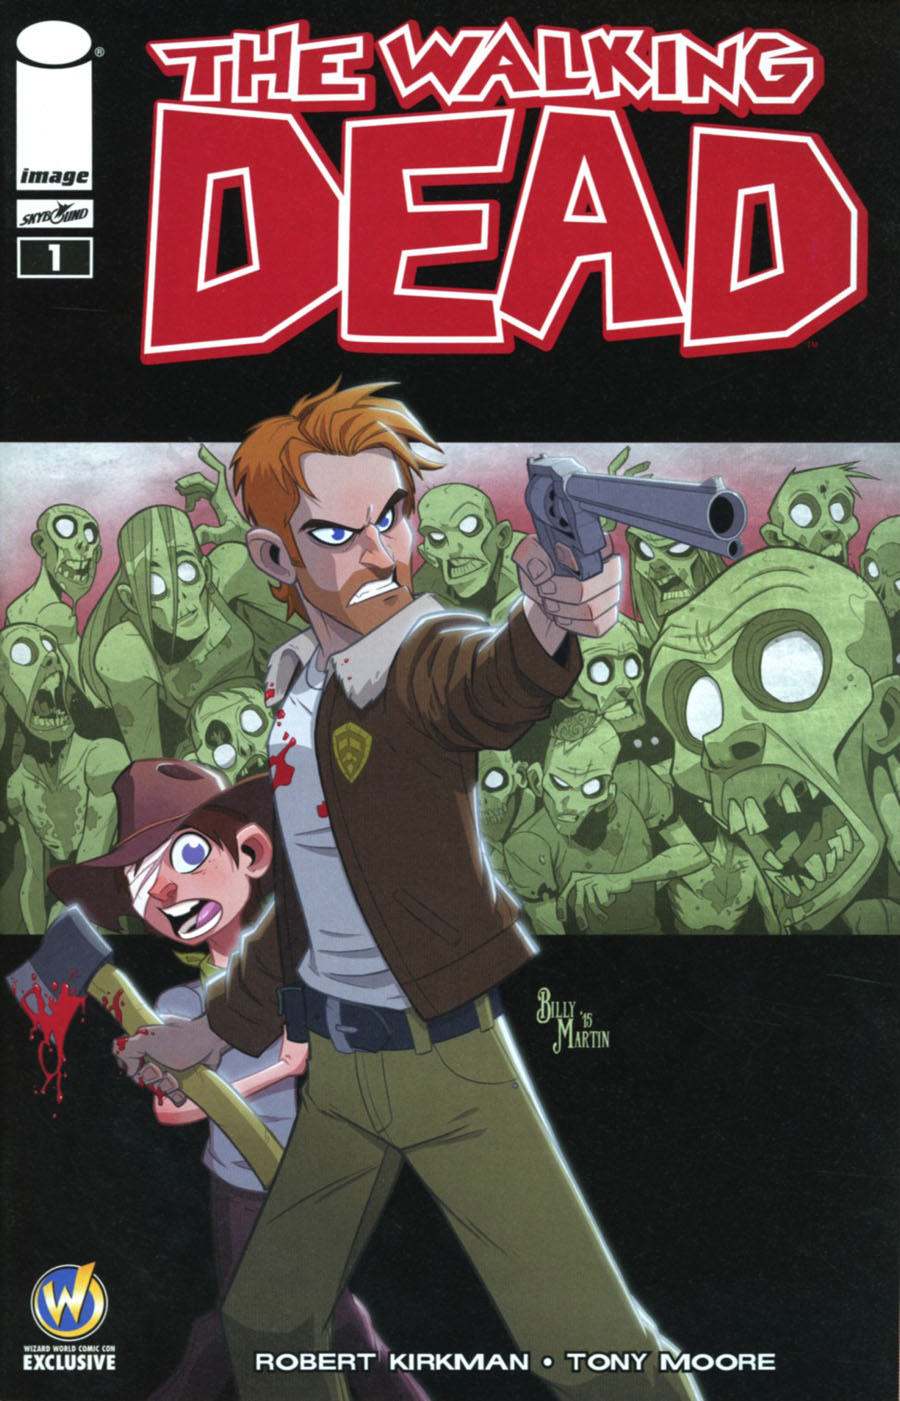 Walking Dead #1 Cover T Wizard World Comic Con Tulsa Exclusive Billy Martin Color Variant Cover